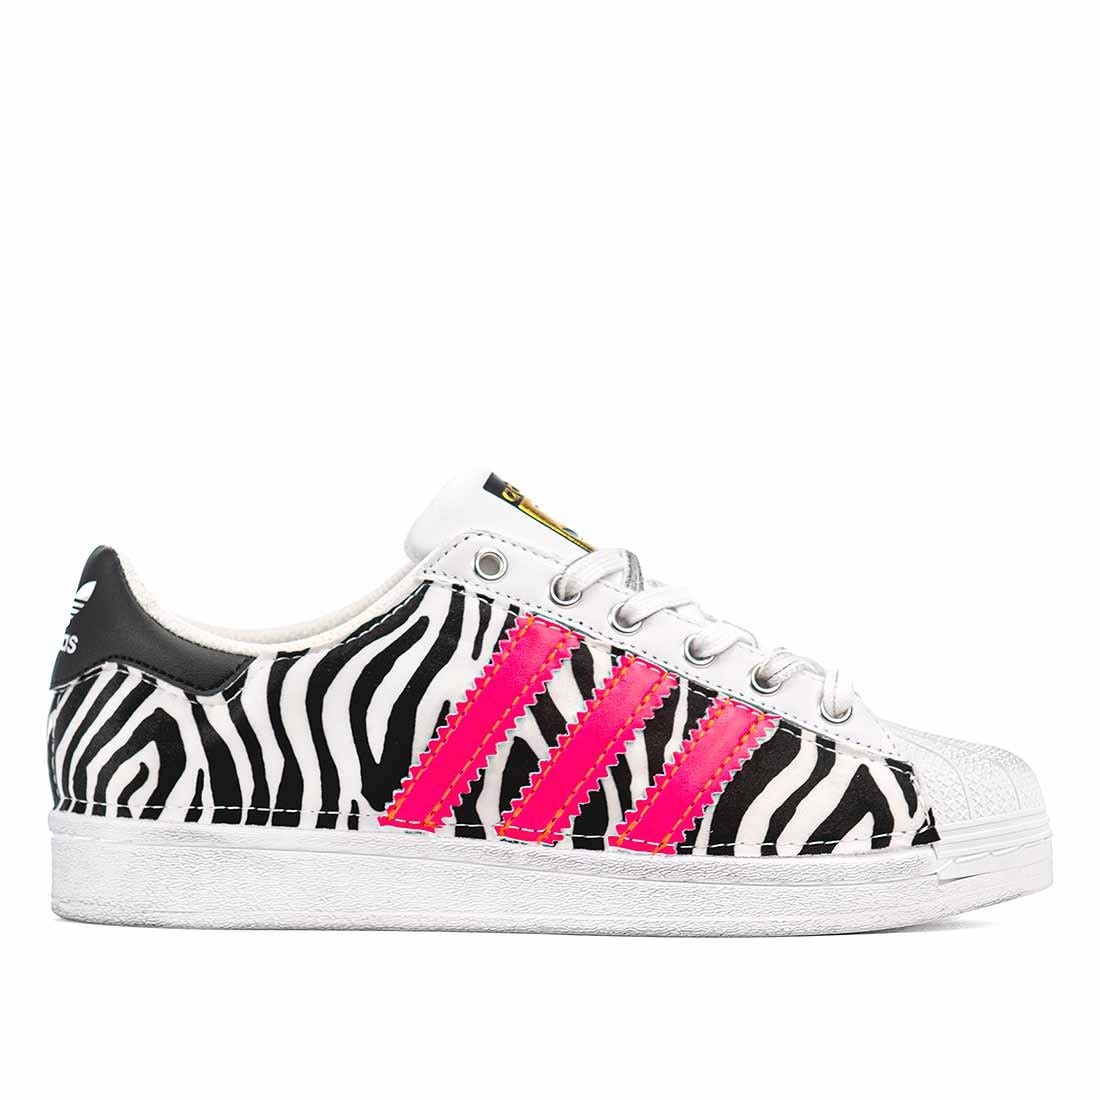 Adidas Superstar Zebrate e Strisce Rosa Neon | Racoon-LAB – Racoon Lab